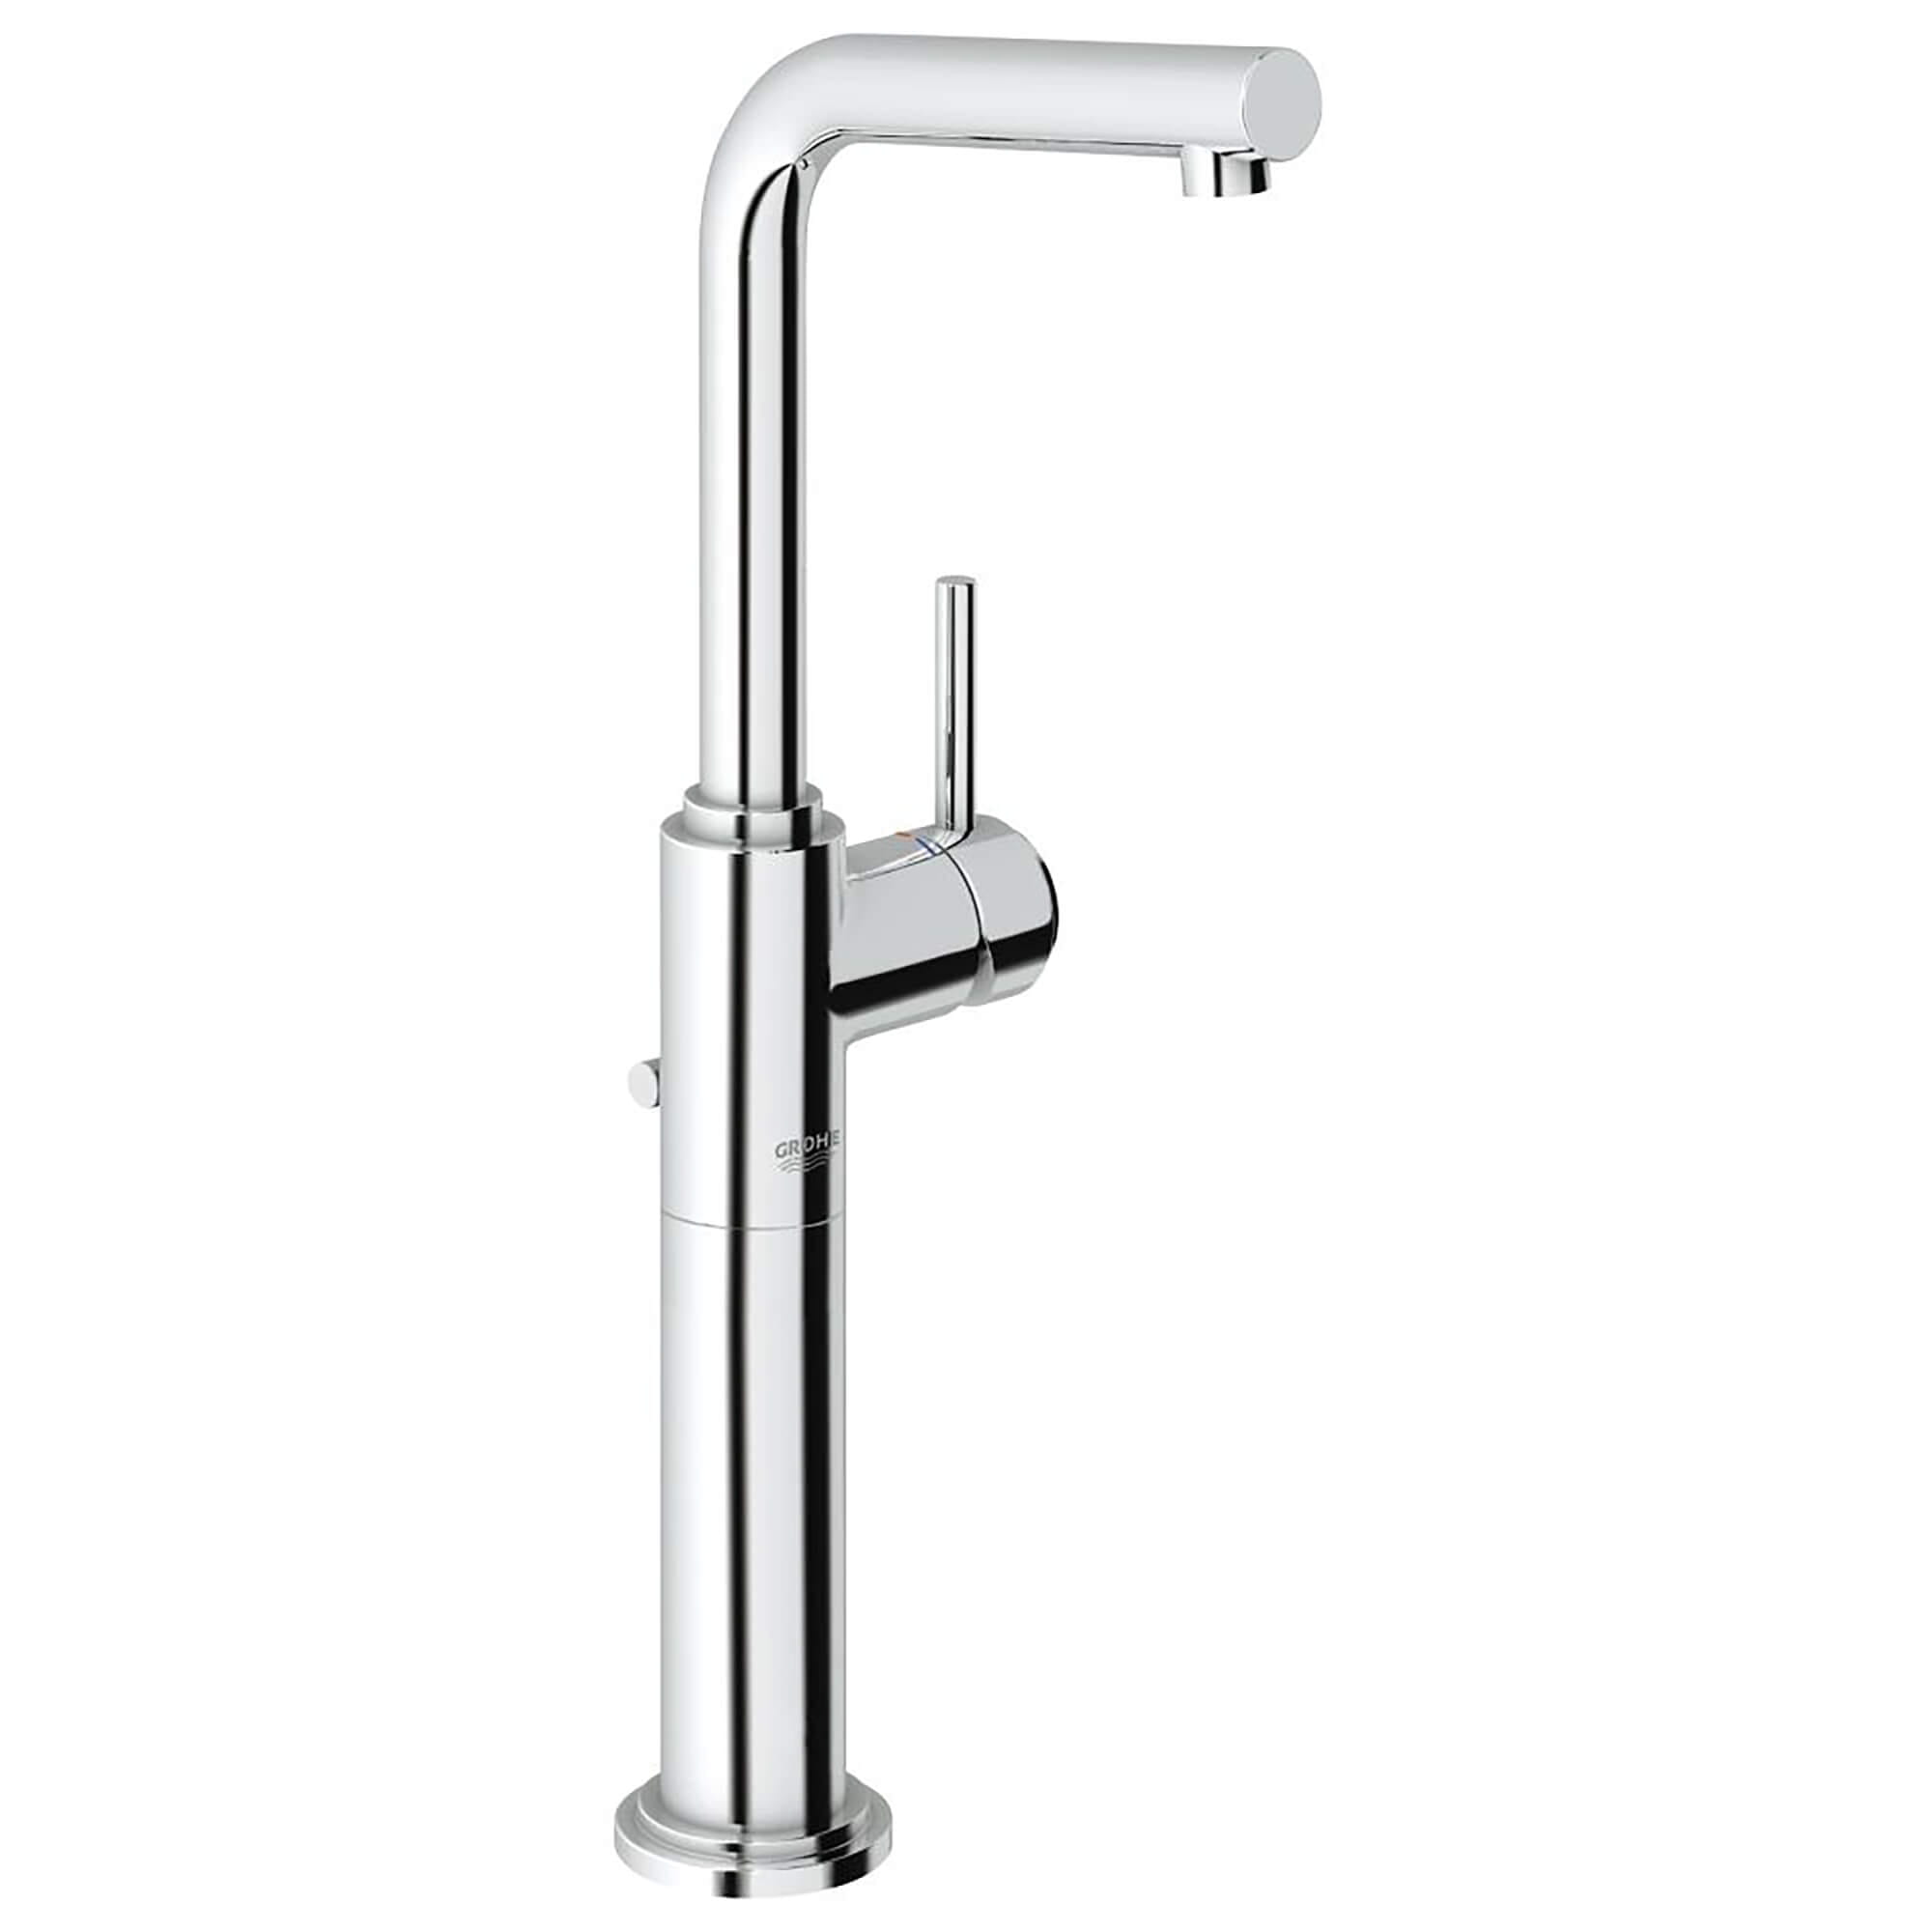 SINGLE HOLE SINGLE-HANDLE DECK MOUNT VESSEL SINK FAUCET 1.5 GPM-related